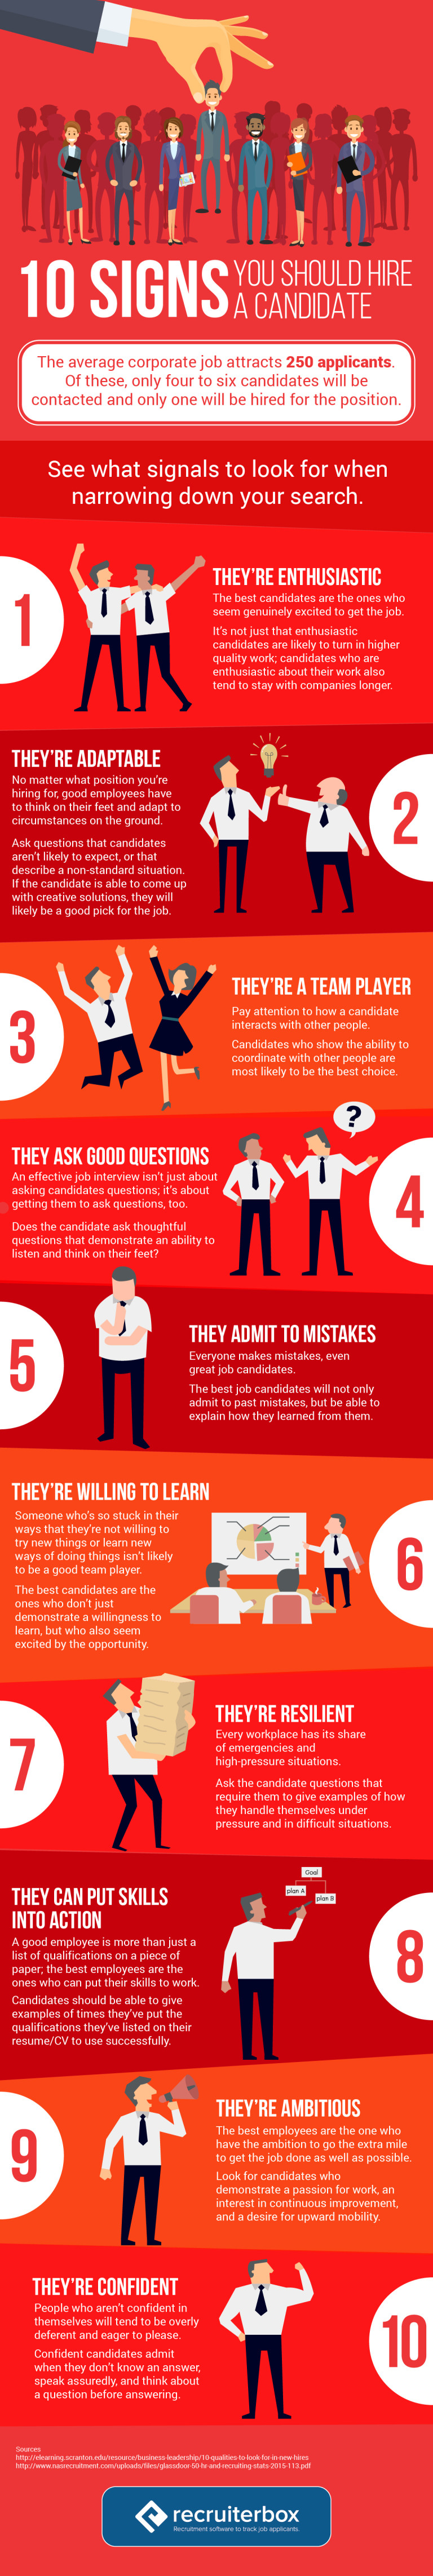 10 Signs You Should Hire a Candidate [Infographic]